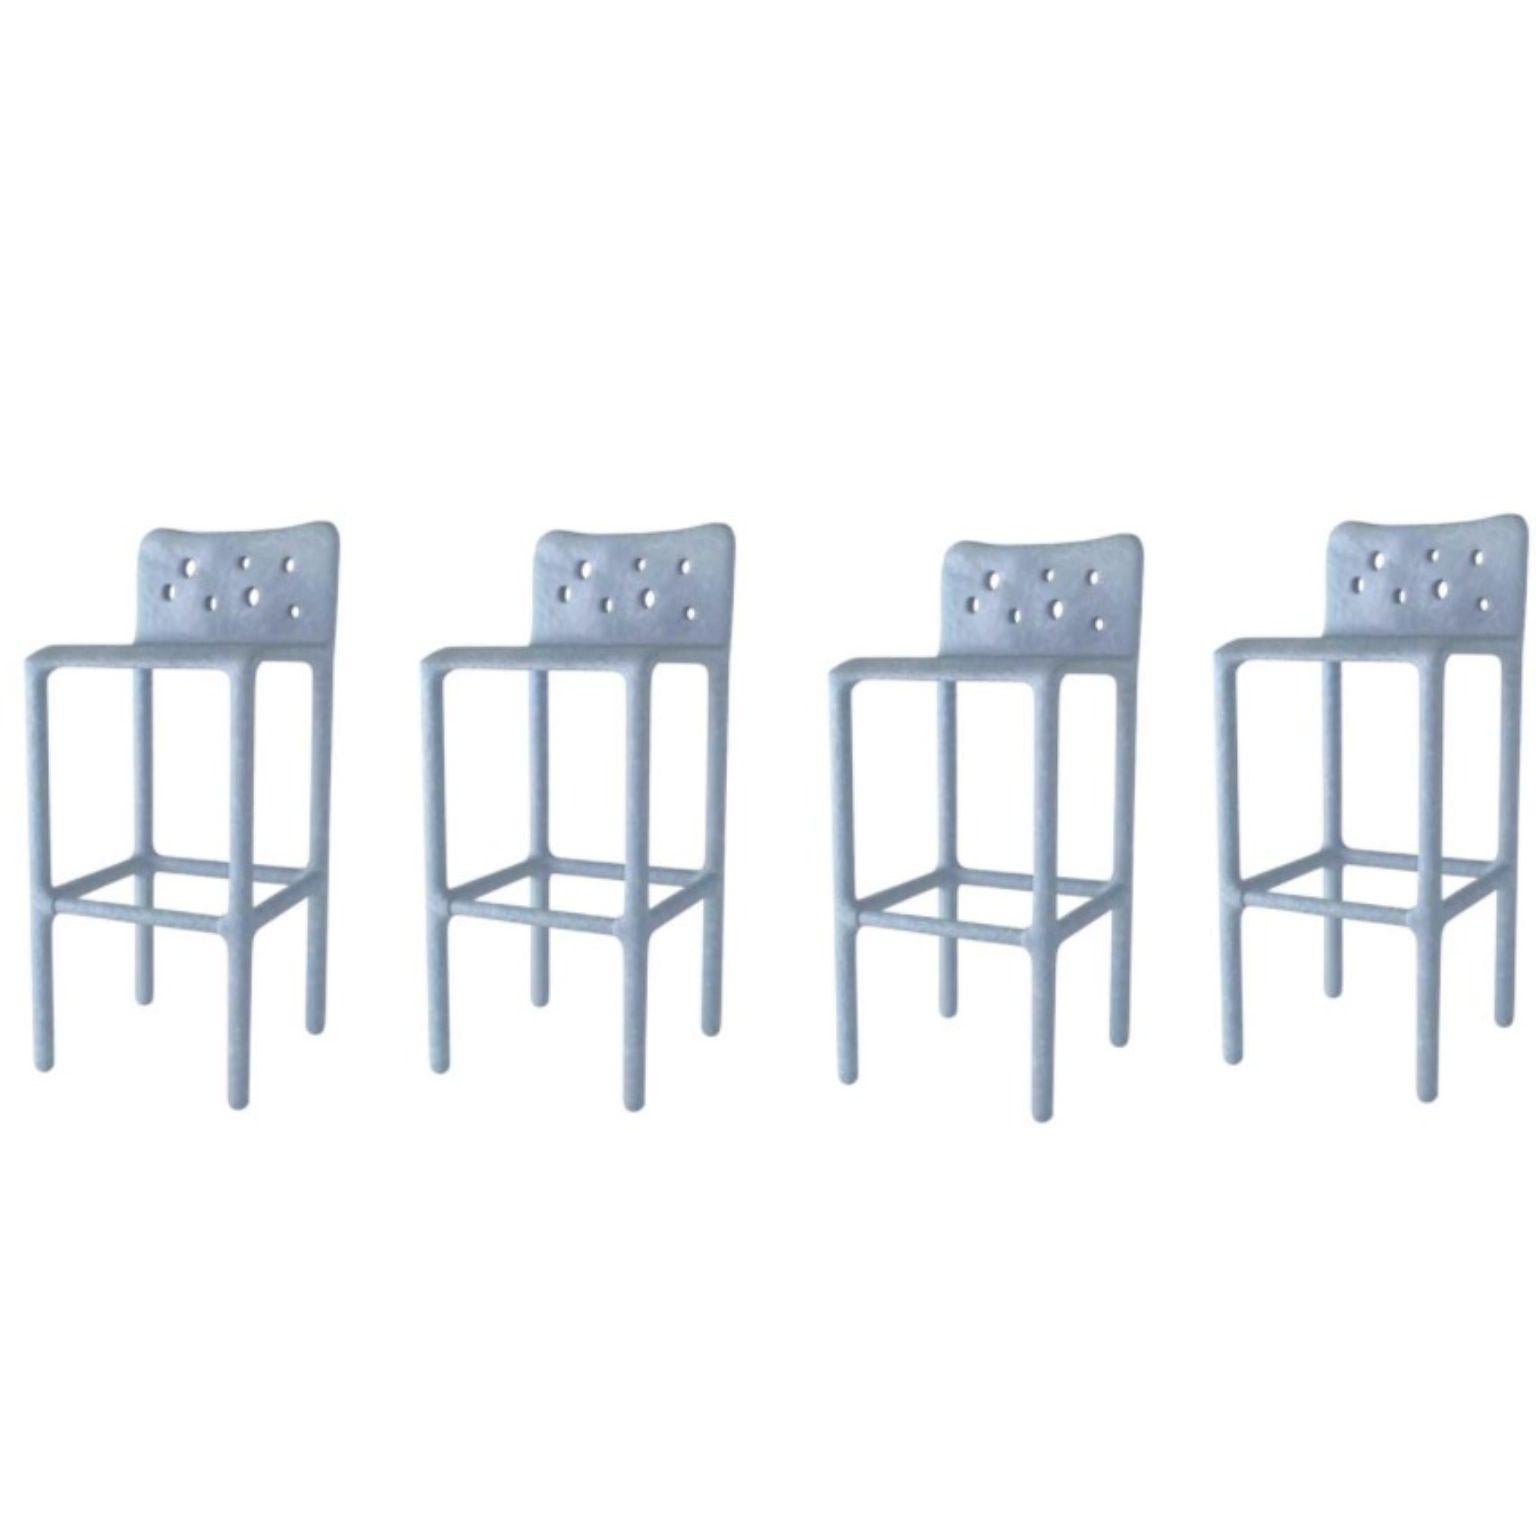 Set of 4 Sky blue sculpted contemporary chairs by Faina.
Design: Victoriya Yakusha.
Material: steel, flax rubber, biopolymer, cellulose.
Dimensions: height 106 x width 45 x sitting place width 49 Legs height: 80 cm
Weight: 20 kilos.

(Also